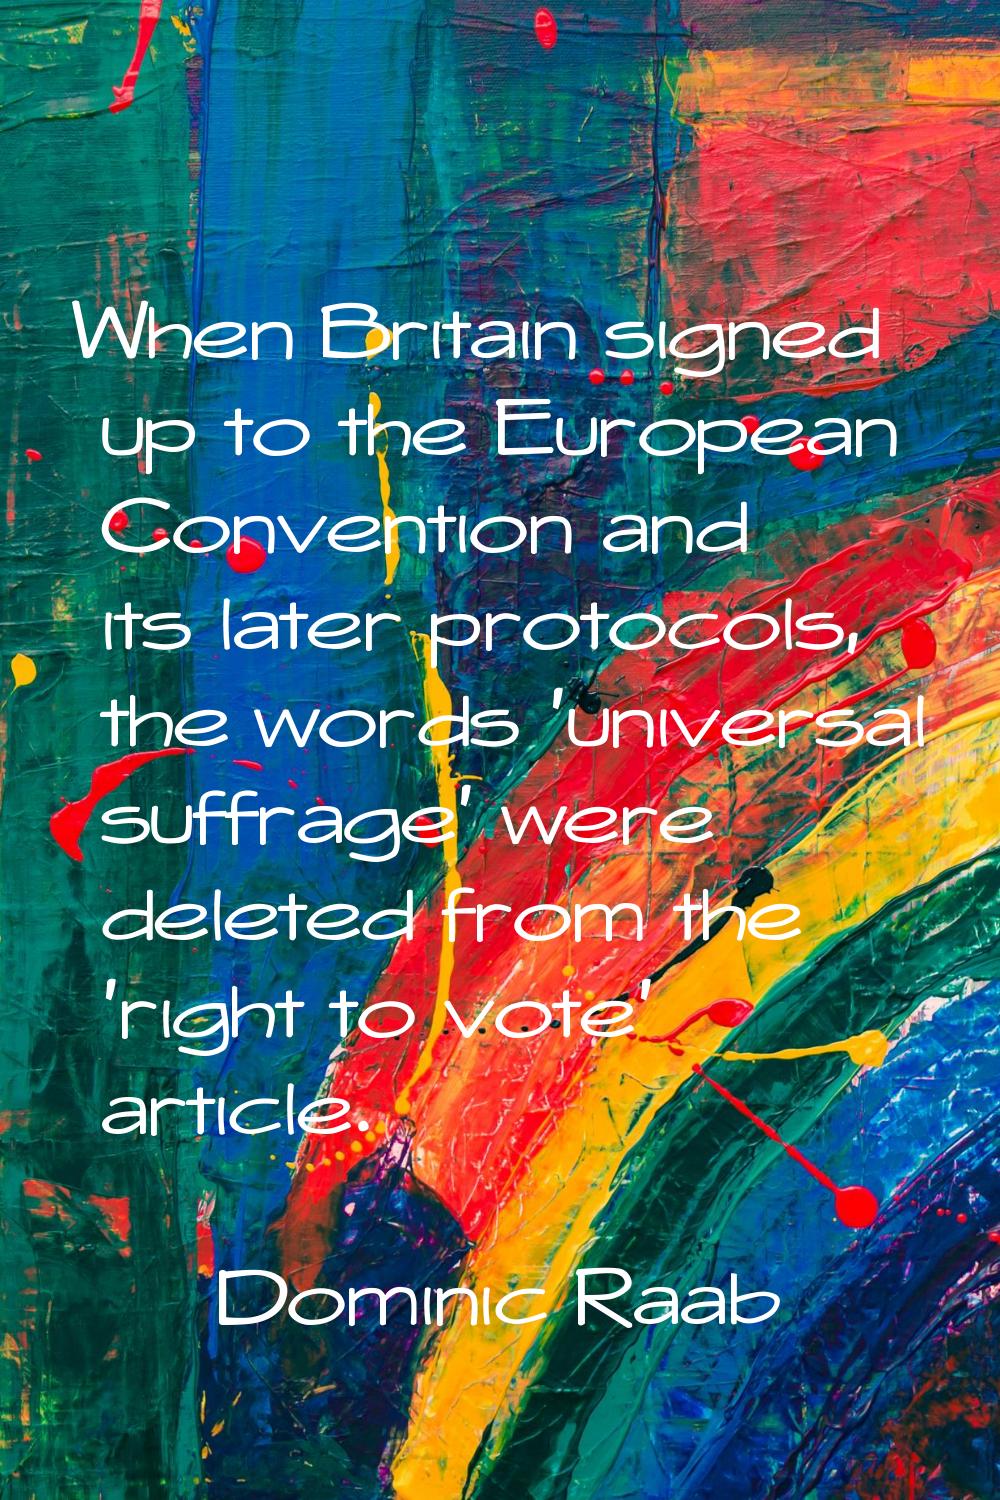 When Britain signed up to the European Convention and its later protocols, the words 'universal suf